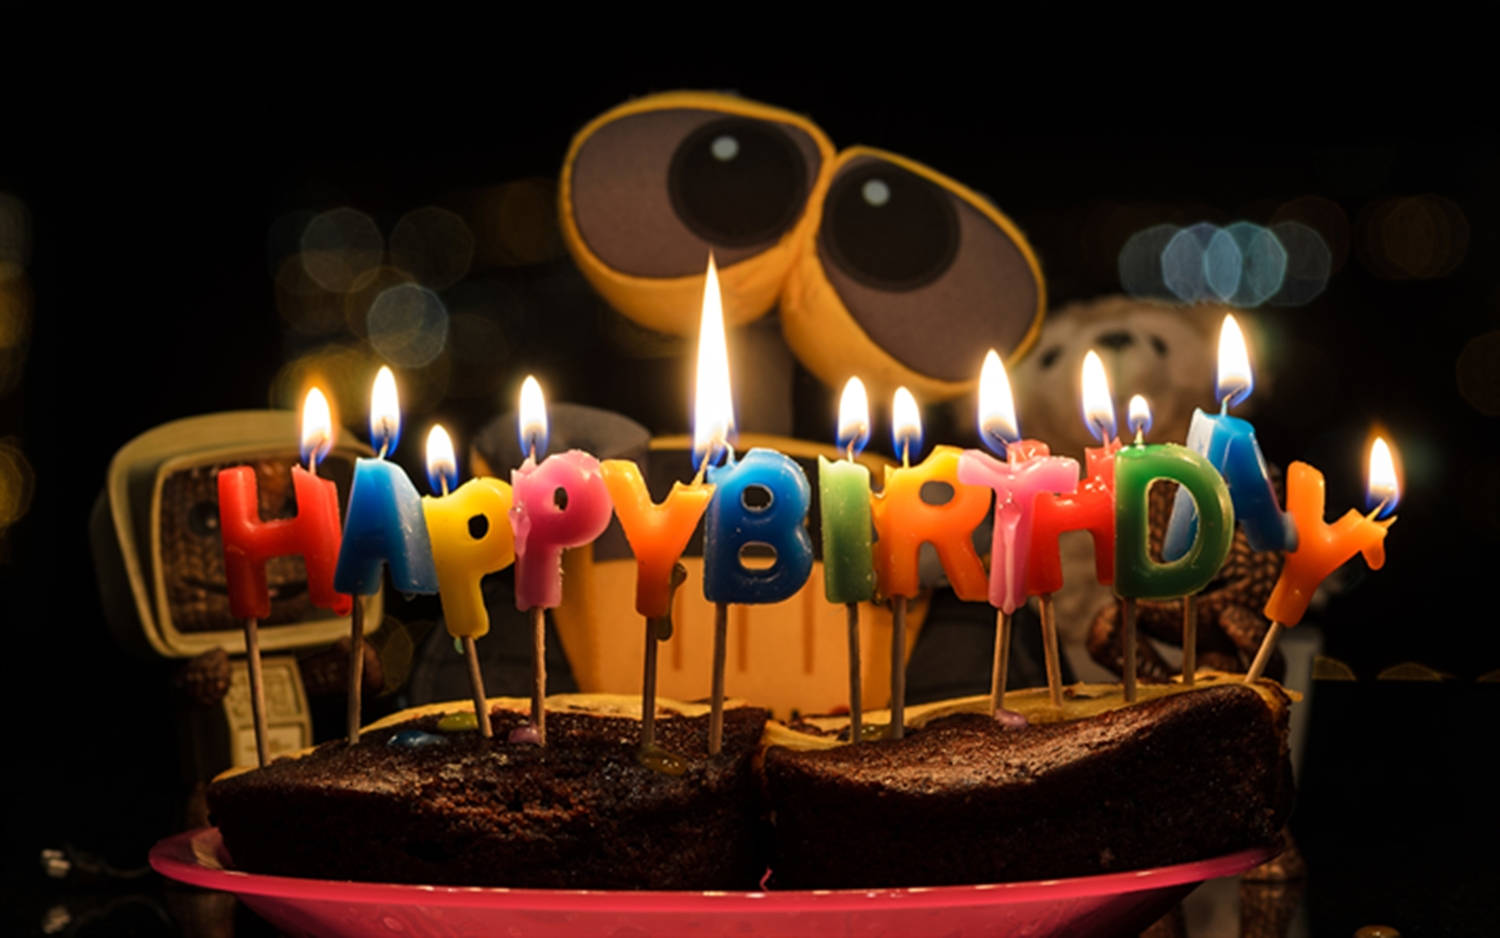 Adorable Wall-E Birthday Cake with Candles Wallpaper